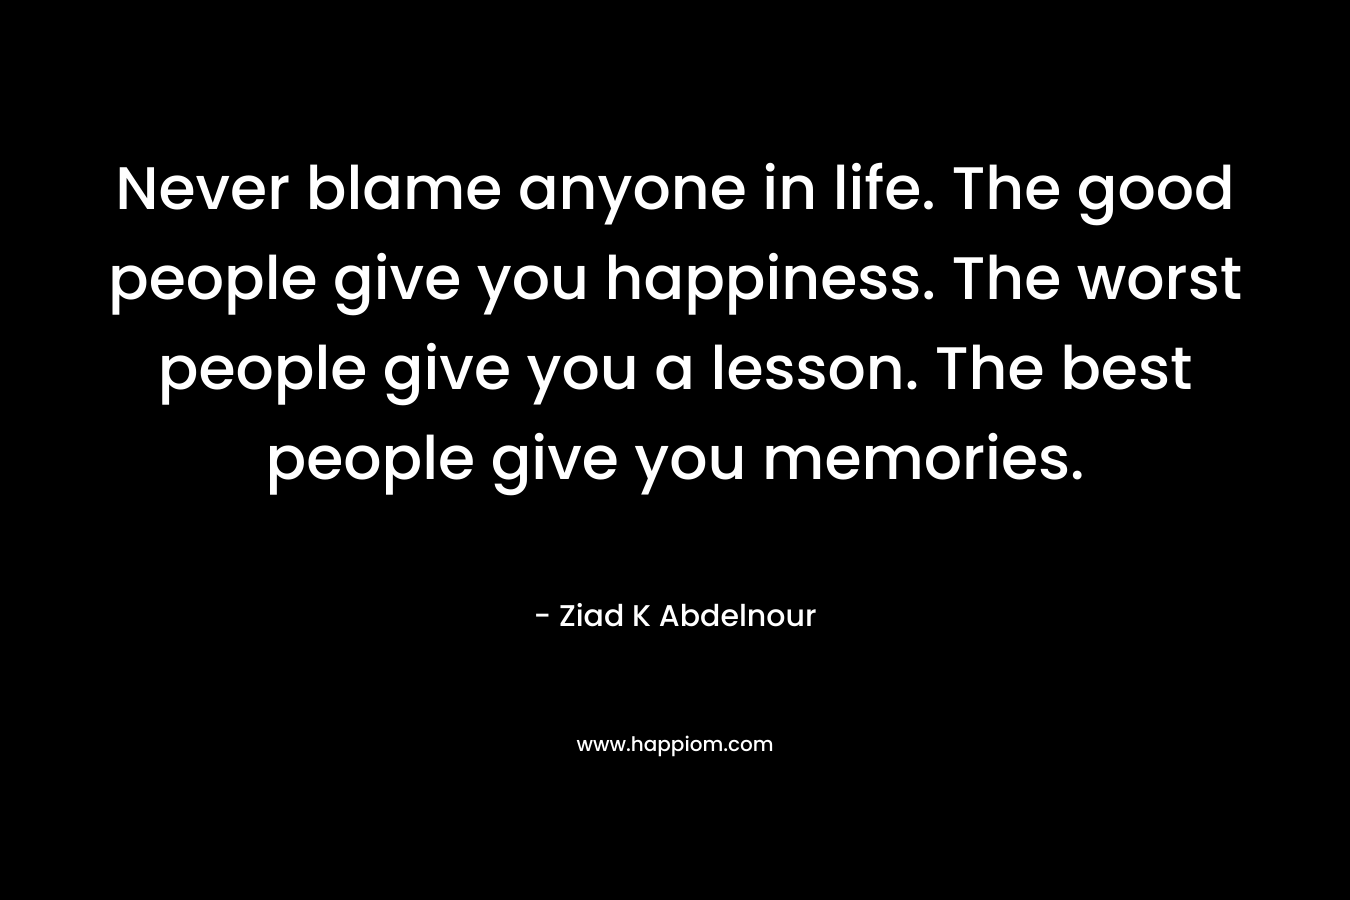 Never blame anyone in life. The good people give you happiness. The worst people give you a lesson. The best people give you memories.